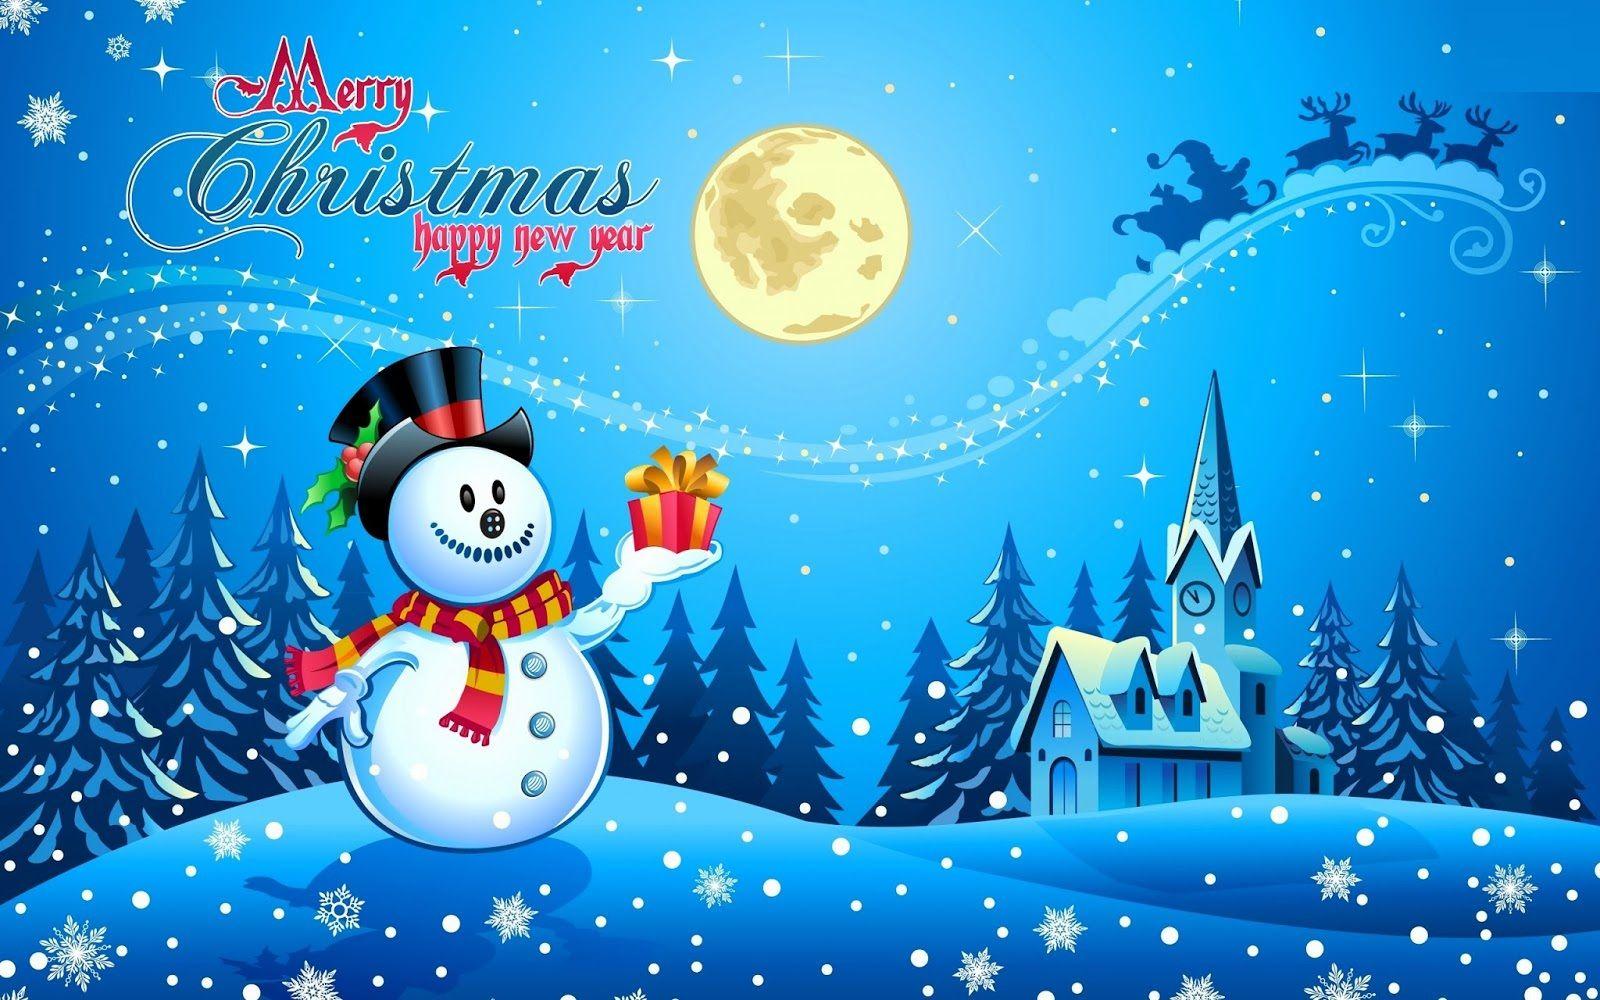 Merry Christmas 2014 HD Wallpapers 3d Gif Animated Images Pics Free  Download